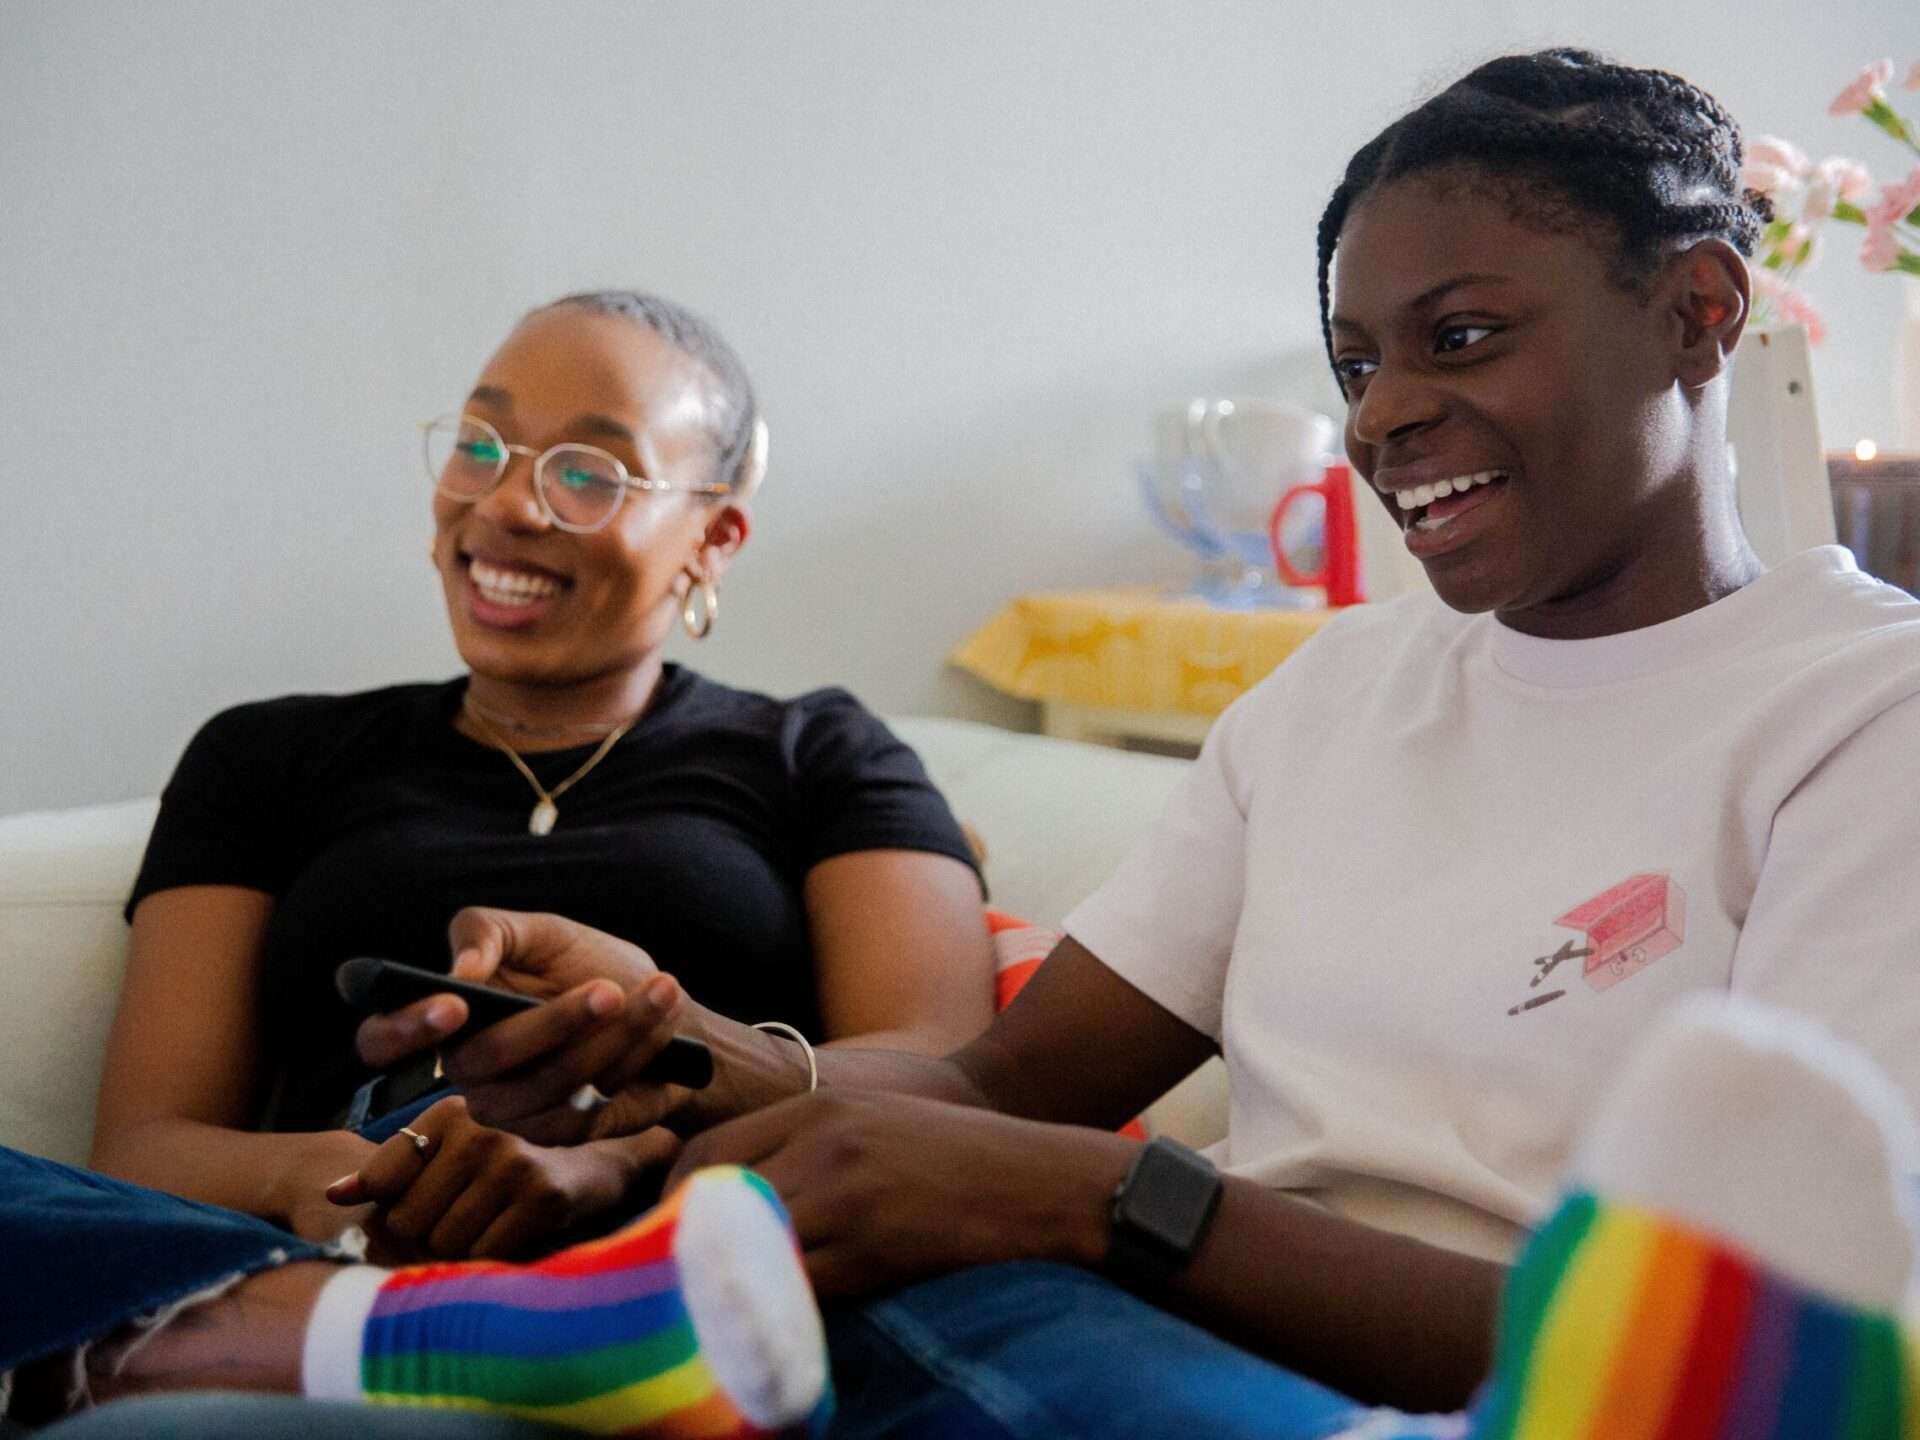 Two women sitting on a couch with rainbow socks.